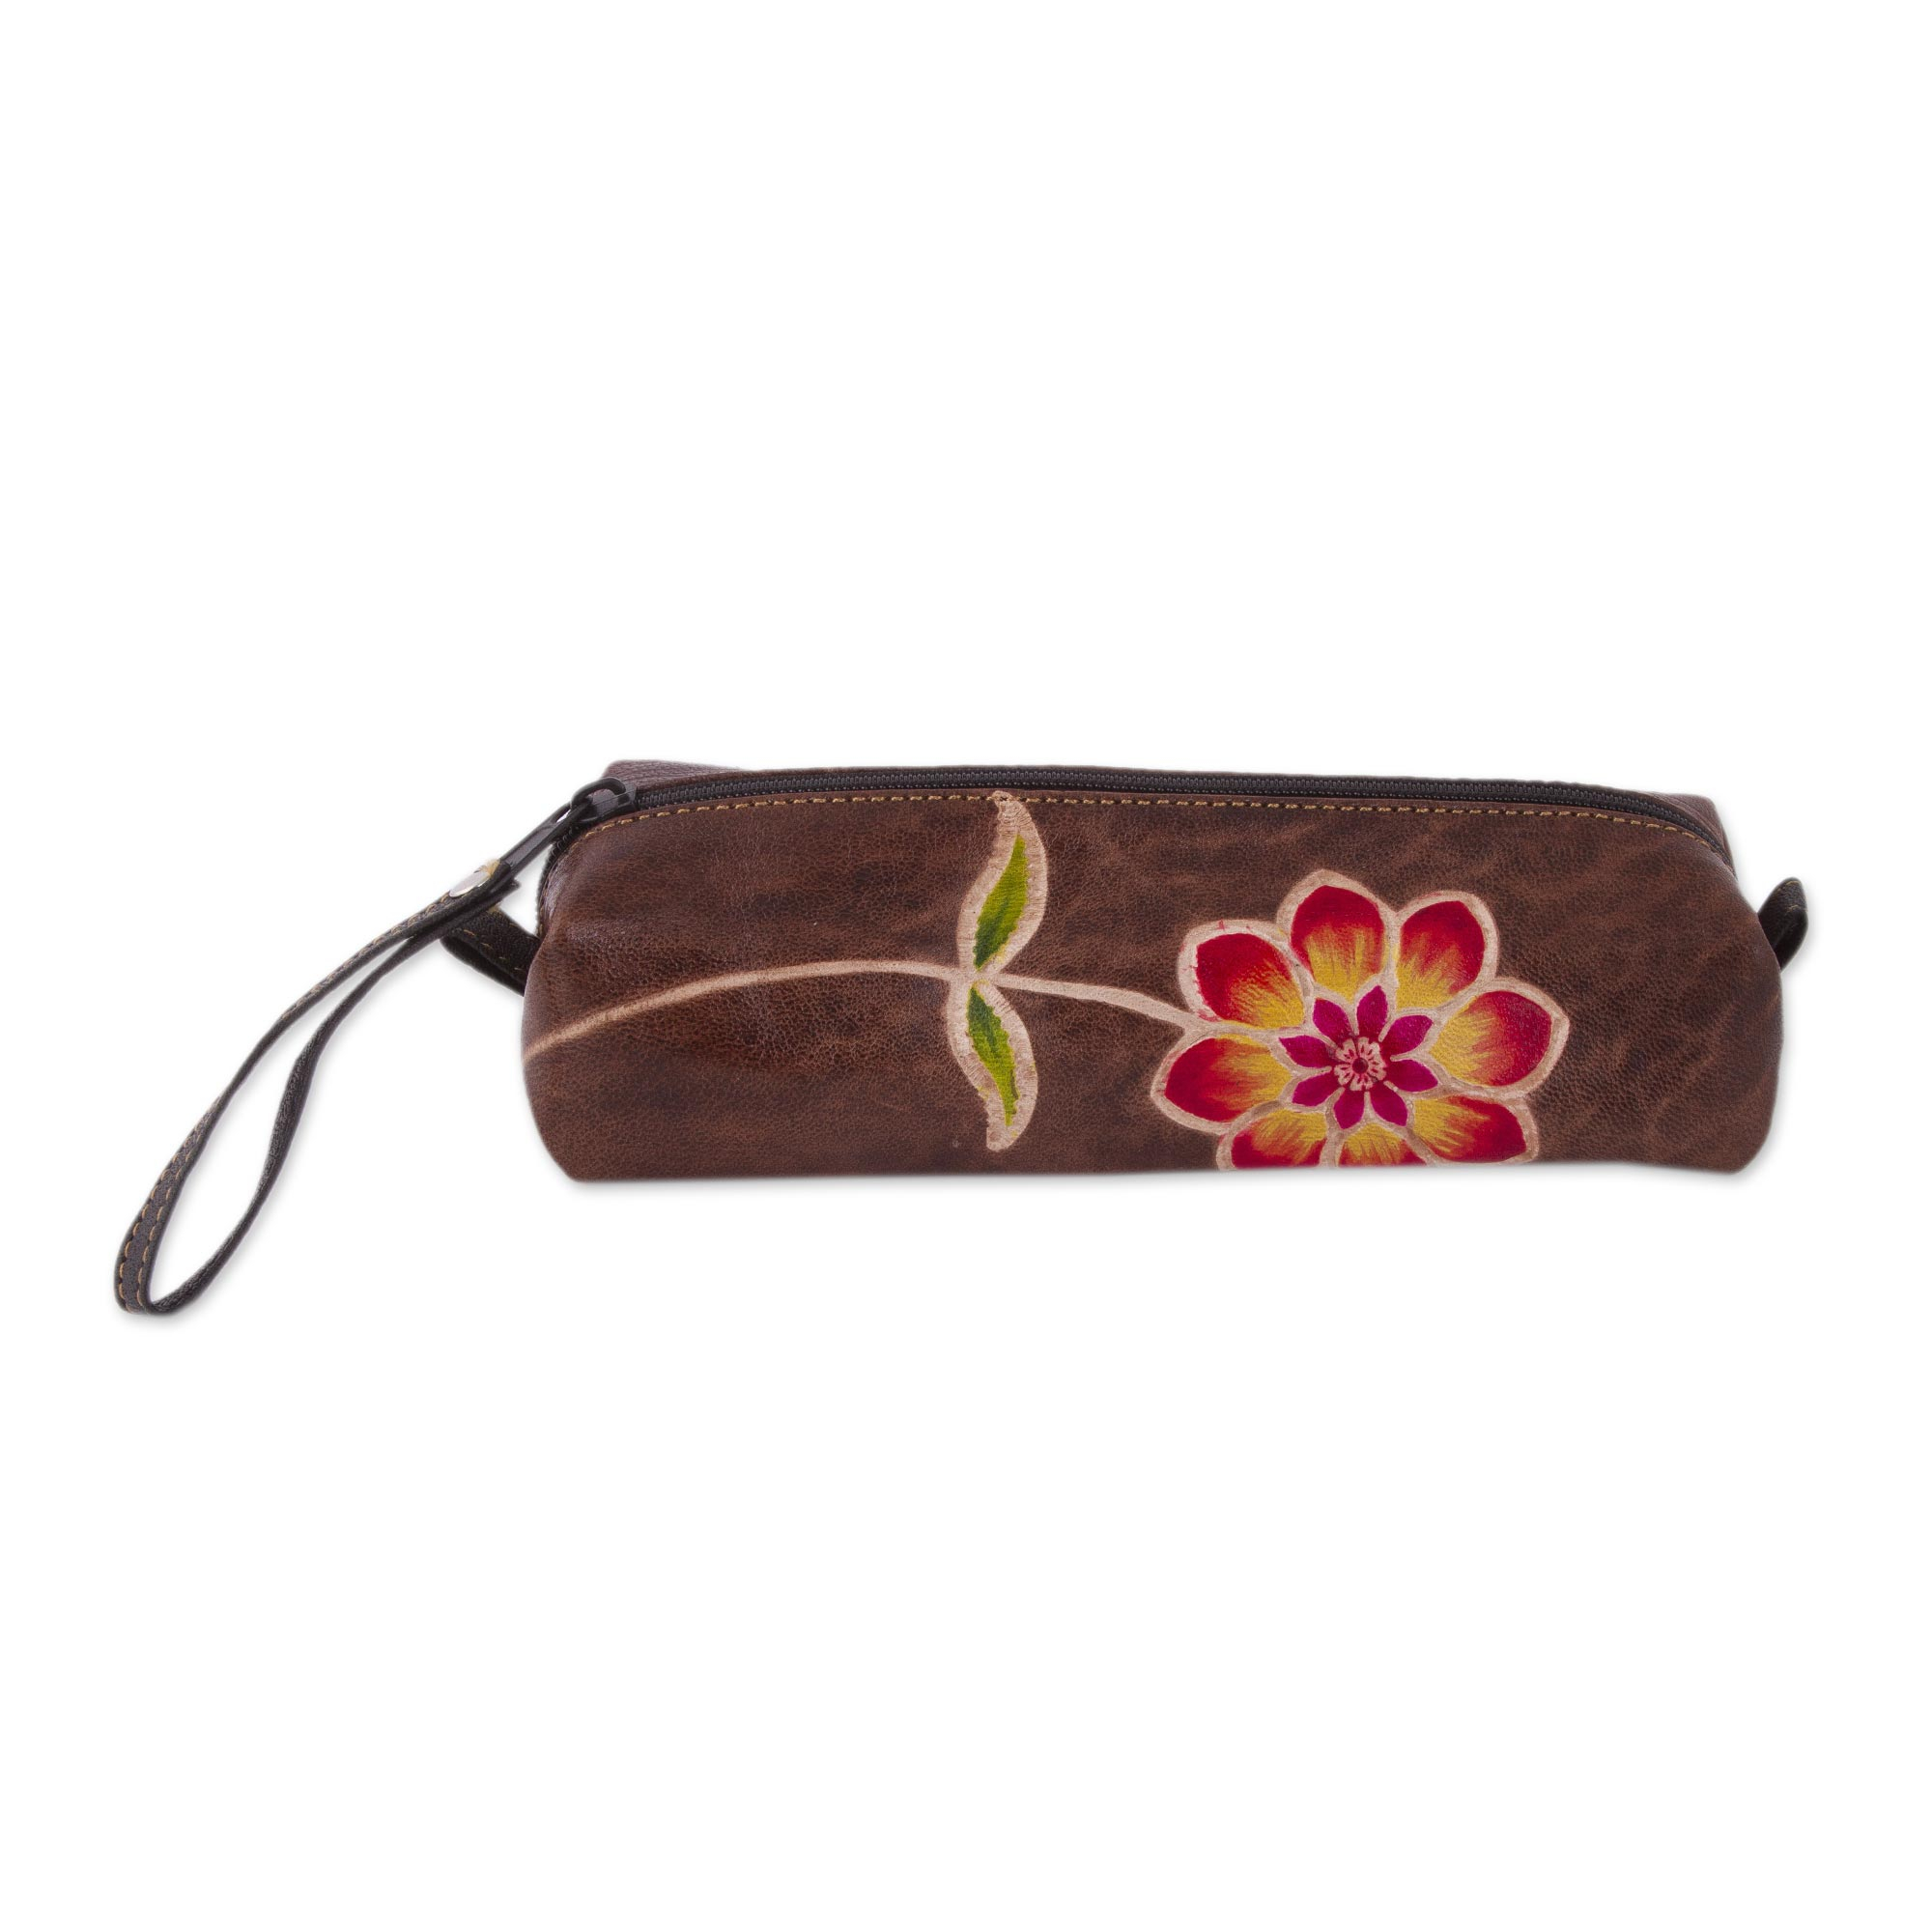 Brown Leather Pencil Case with Hand Painted Flower - Moray Flower | NOVICA